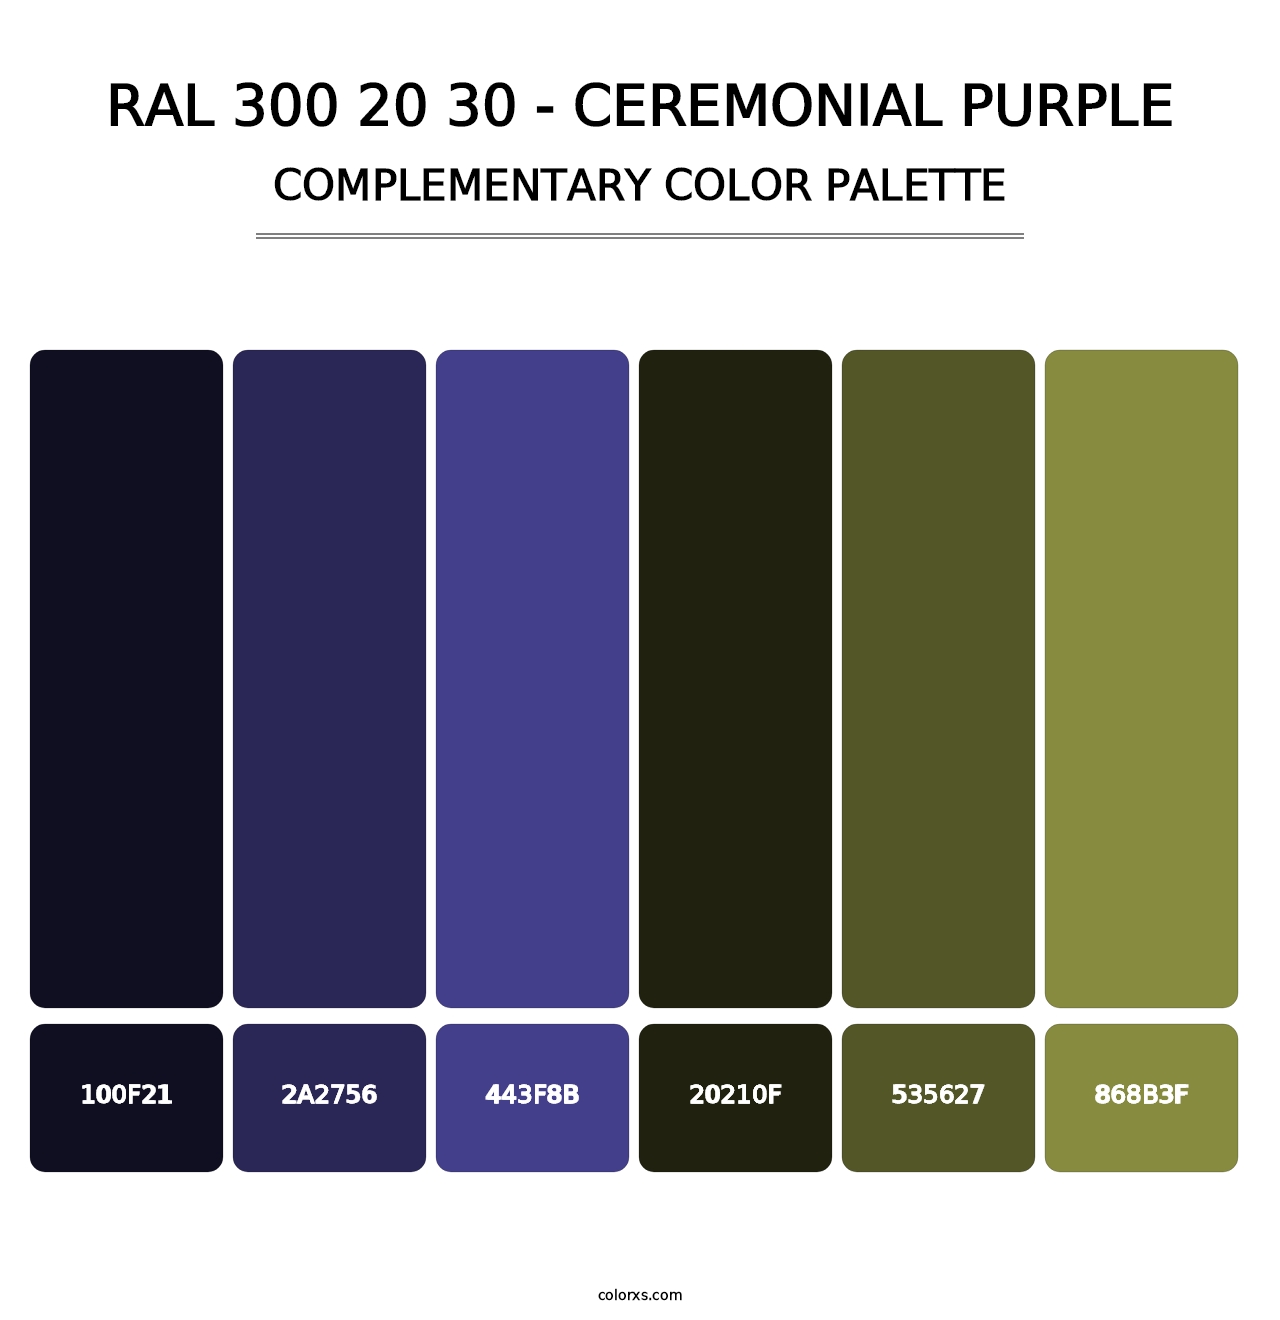 RAL 300 20 30 - Ceremonial Purple - Complementary Color Palette